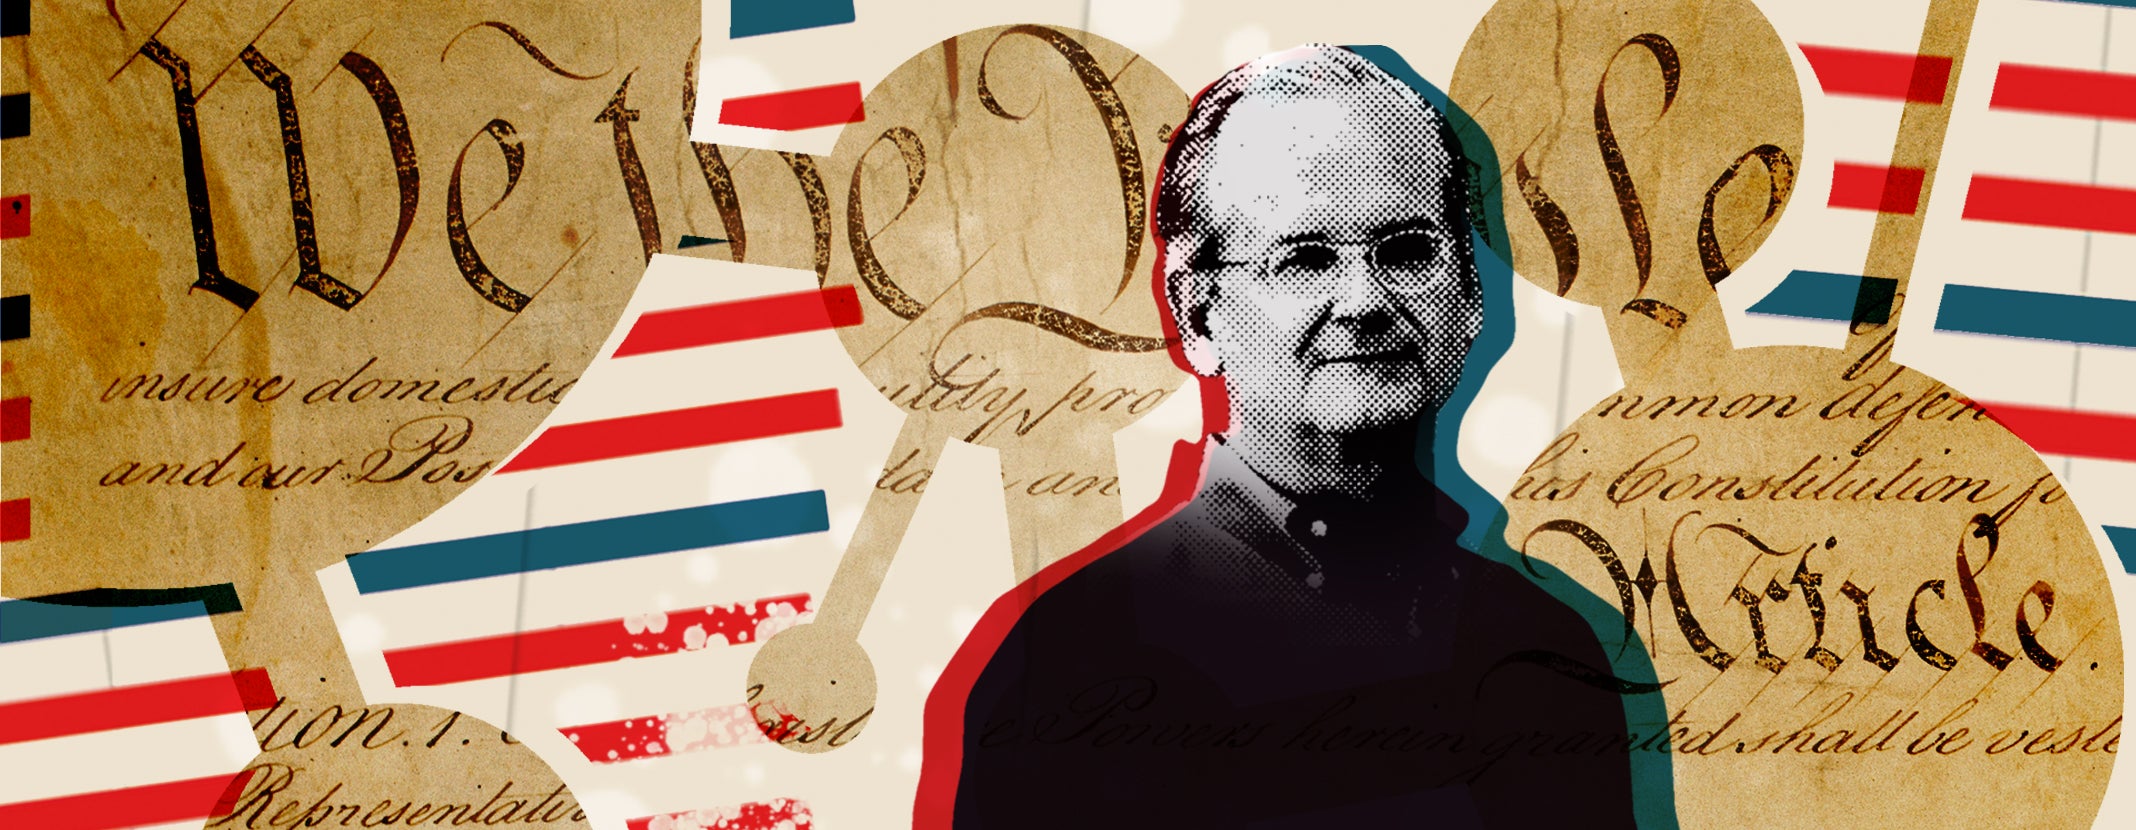 Illustration of a Larry Lessig in the foreground with pieces of the U.S. constitution behind him and over red, white and blue stripes